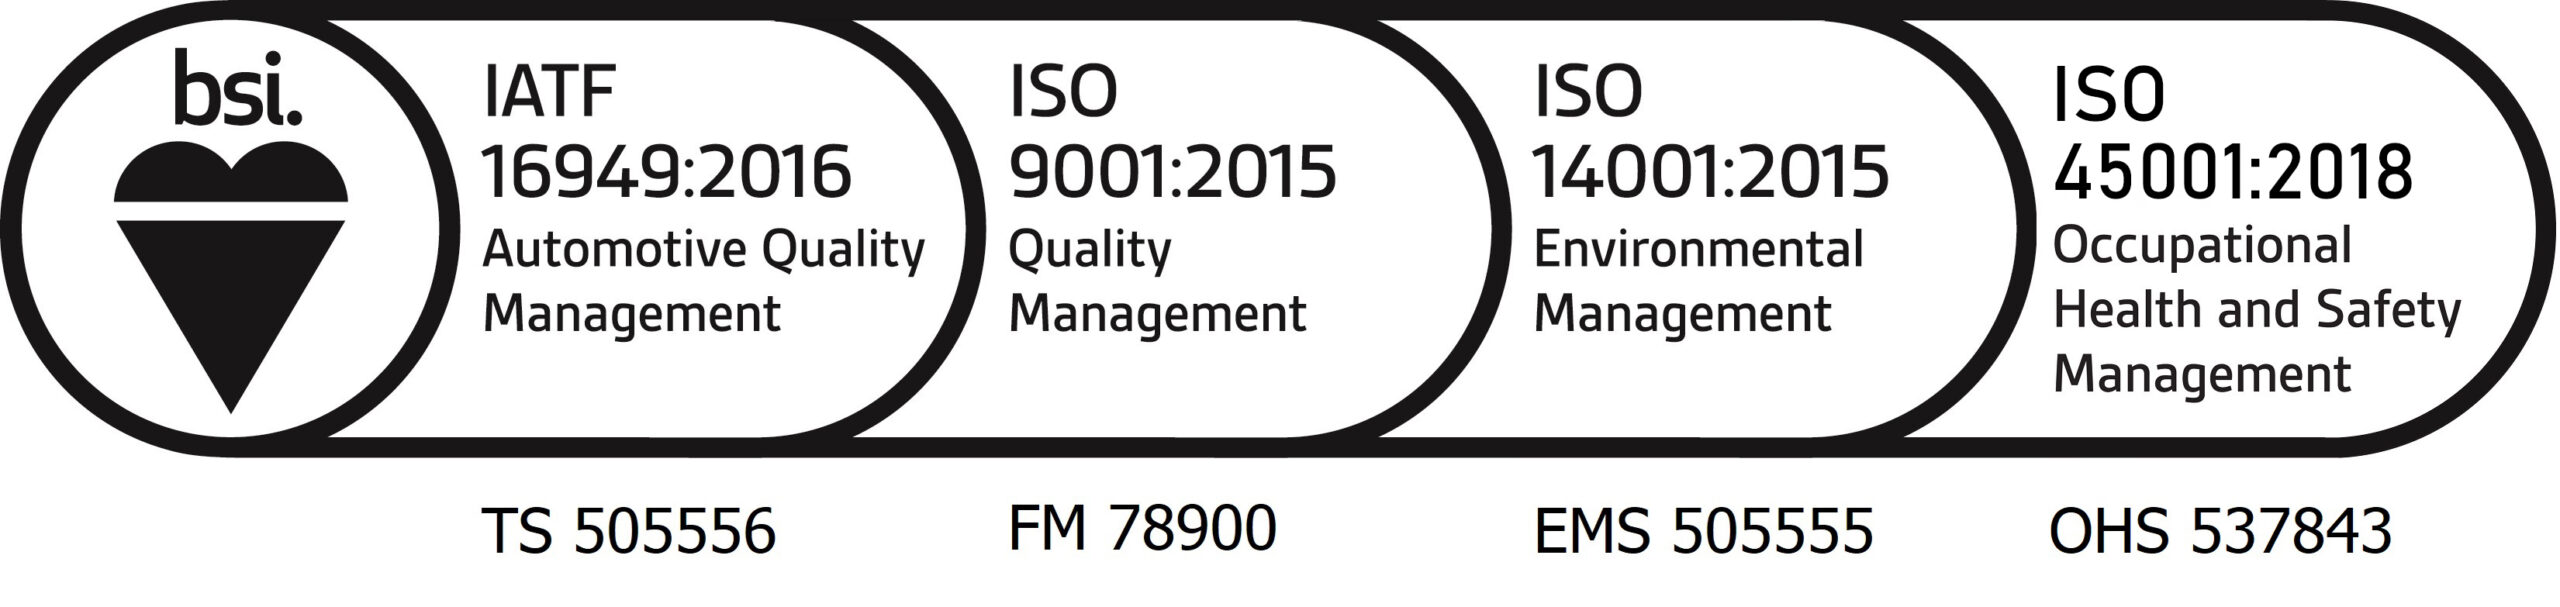 Quality BSI Assurance Mark, Precision Metal Stampings and Fabrication